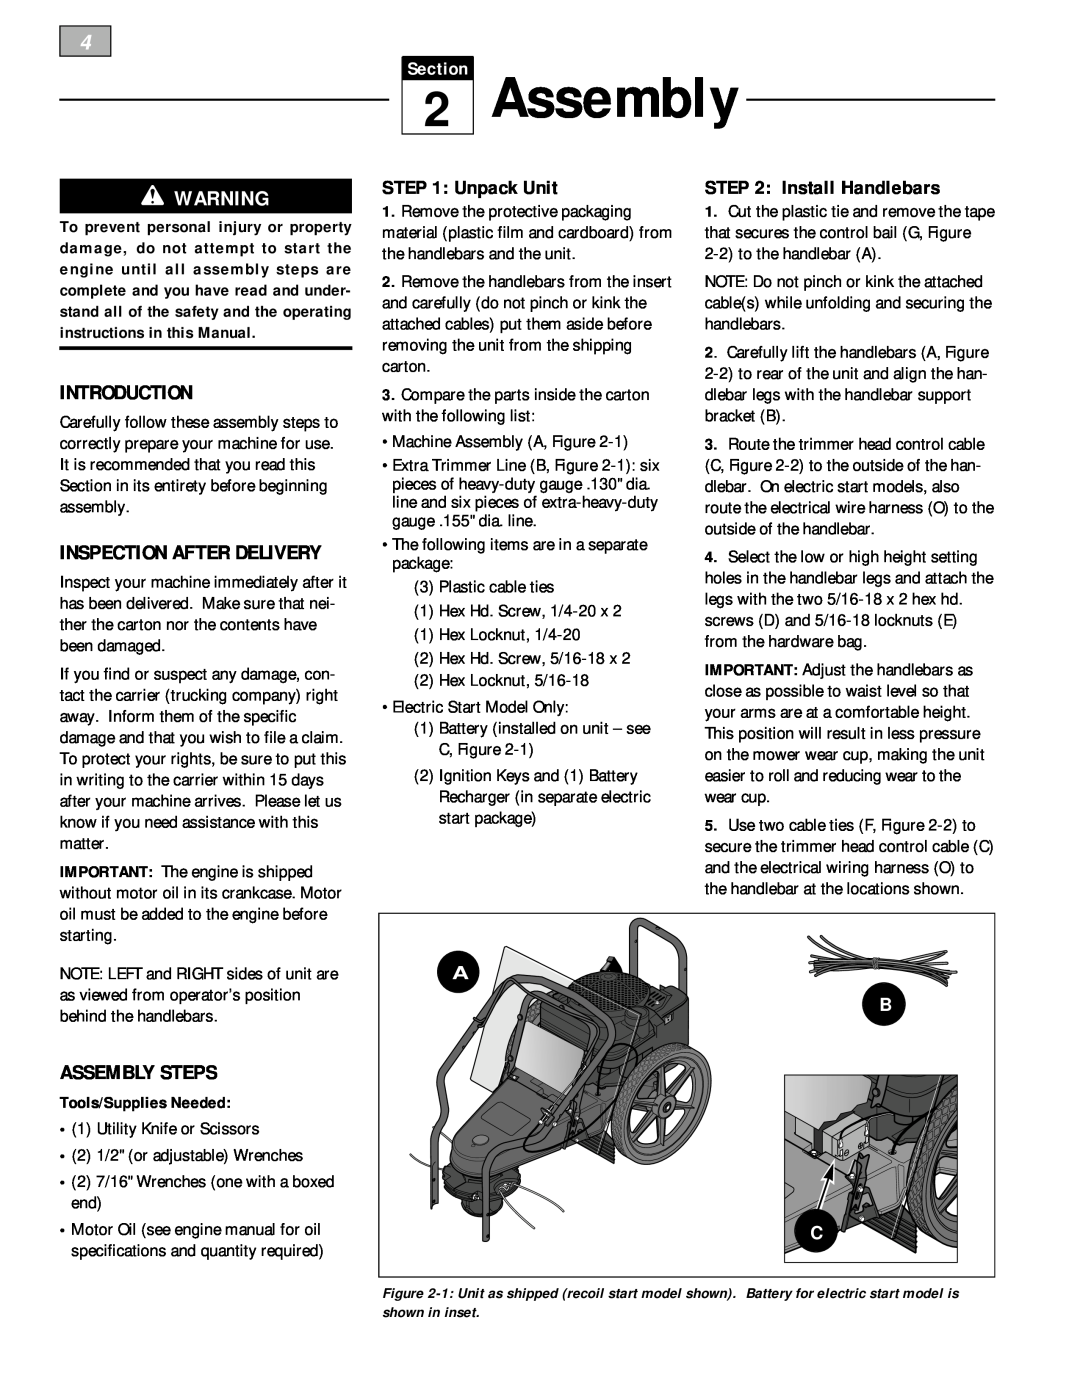 Troy-Bilt 52063, 52064 owner manual Introduction, Assembly Steps, Section, Tools/Supplies Needed 